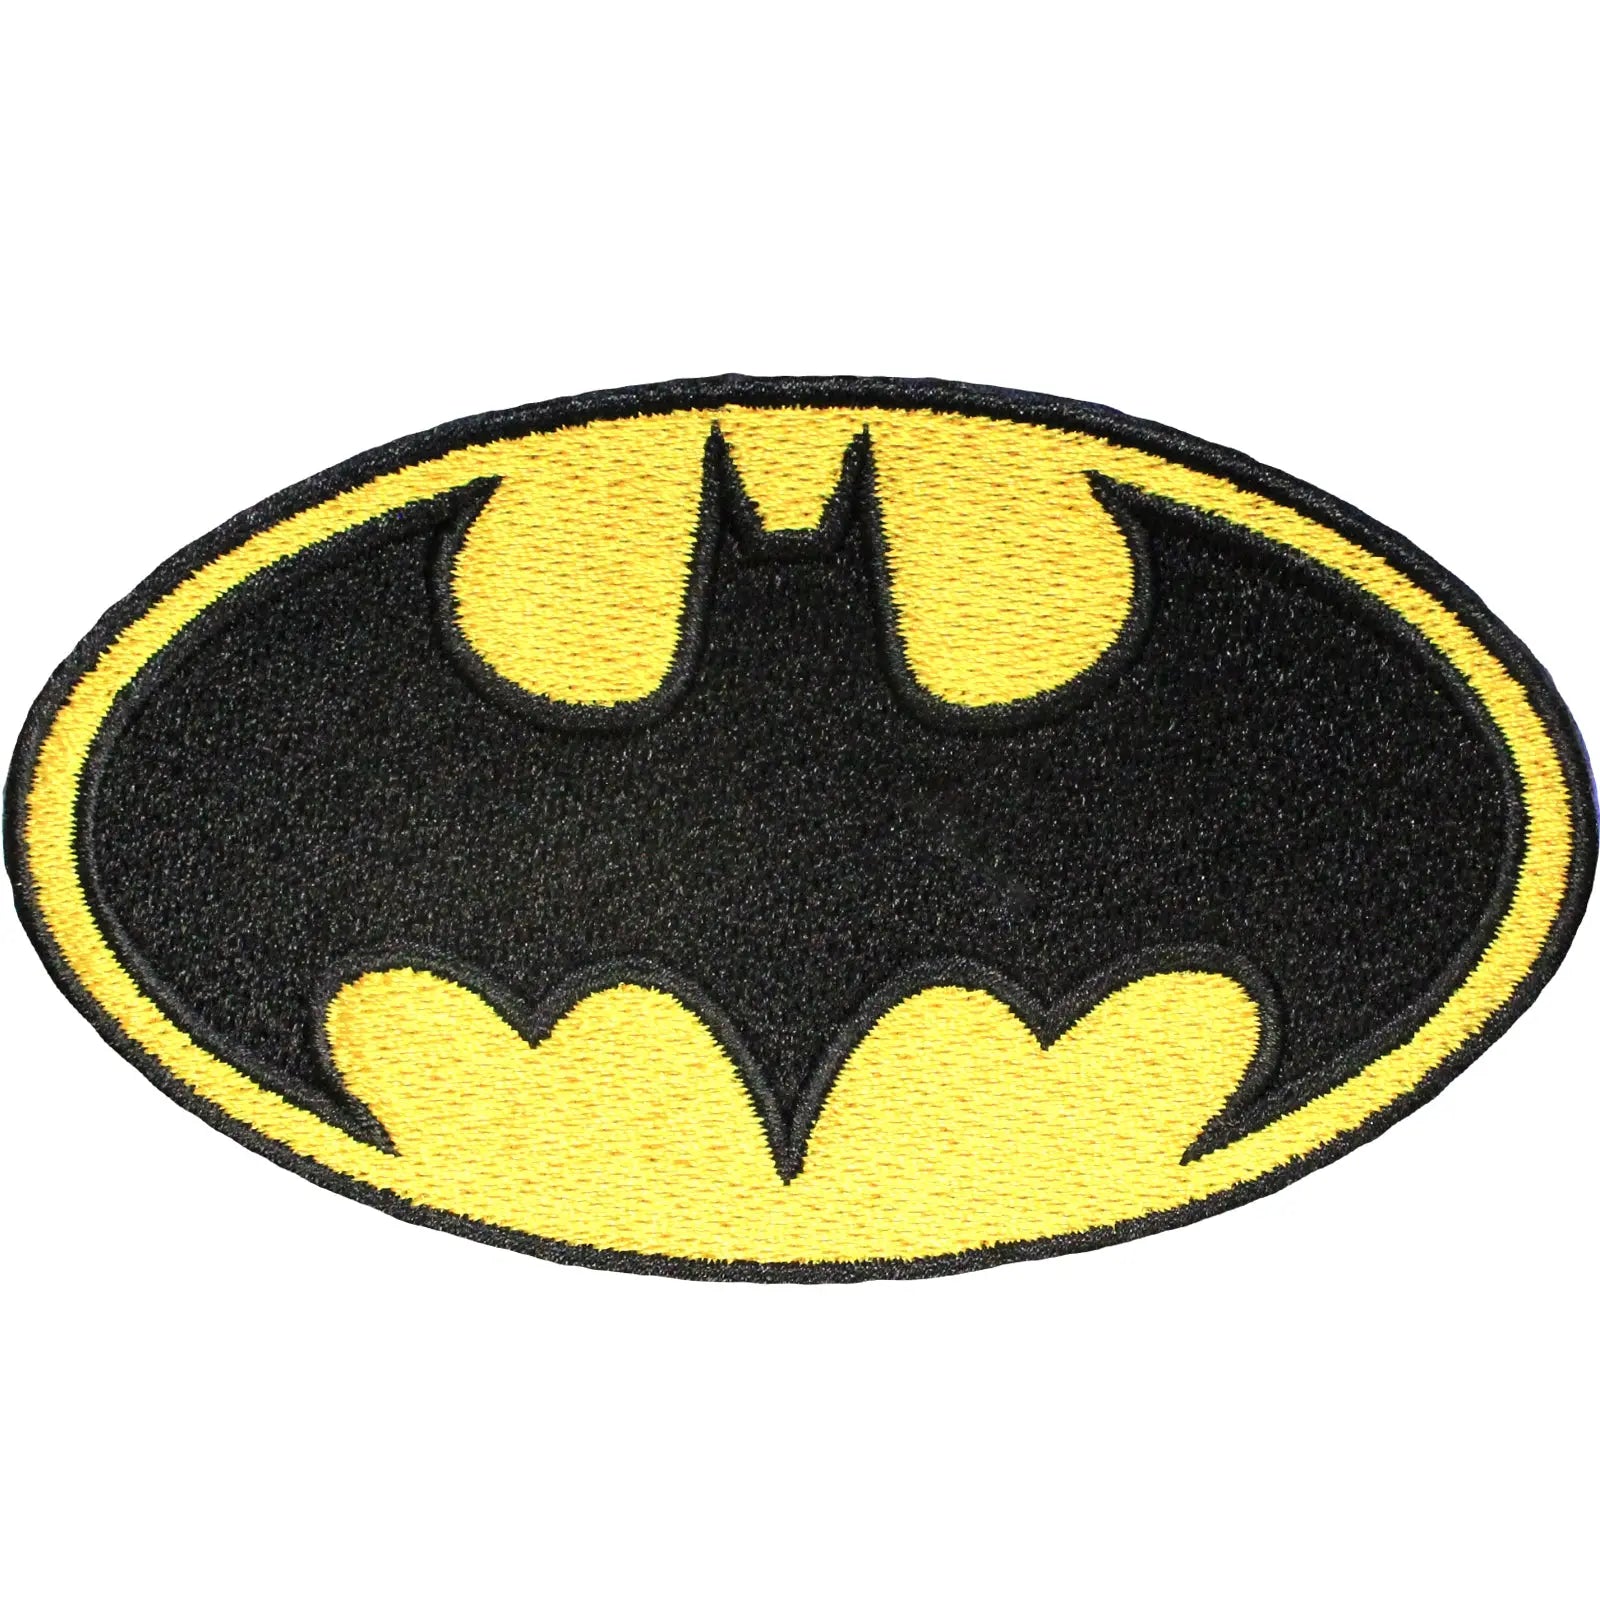 BATMAN RATED Badge for Offroad Vehicle – Loot Designs